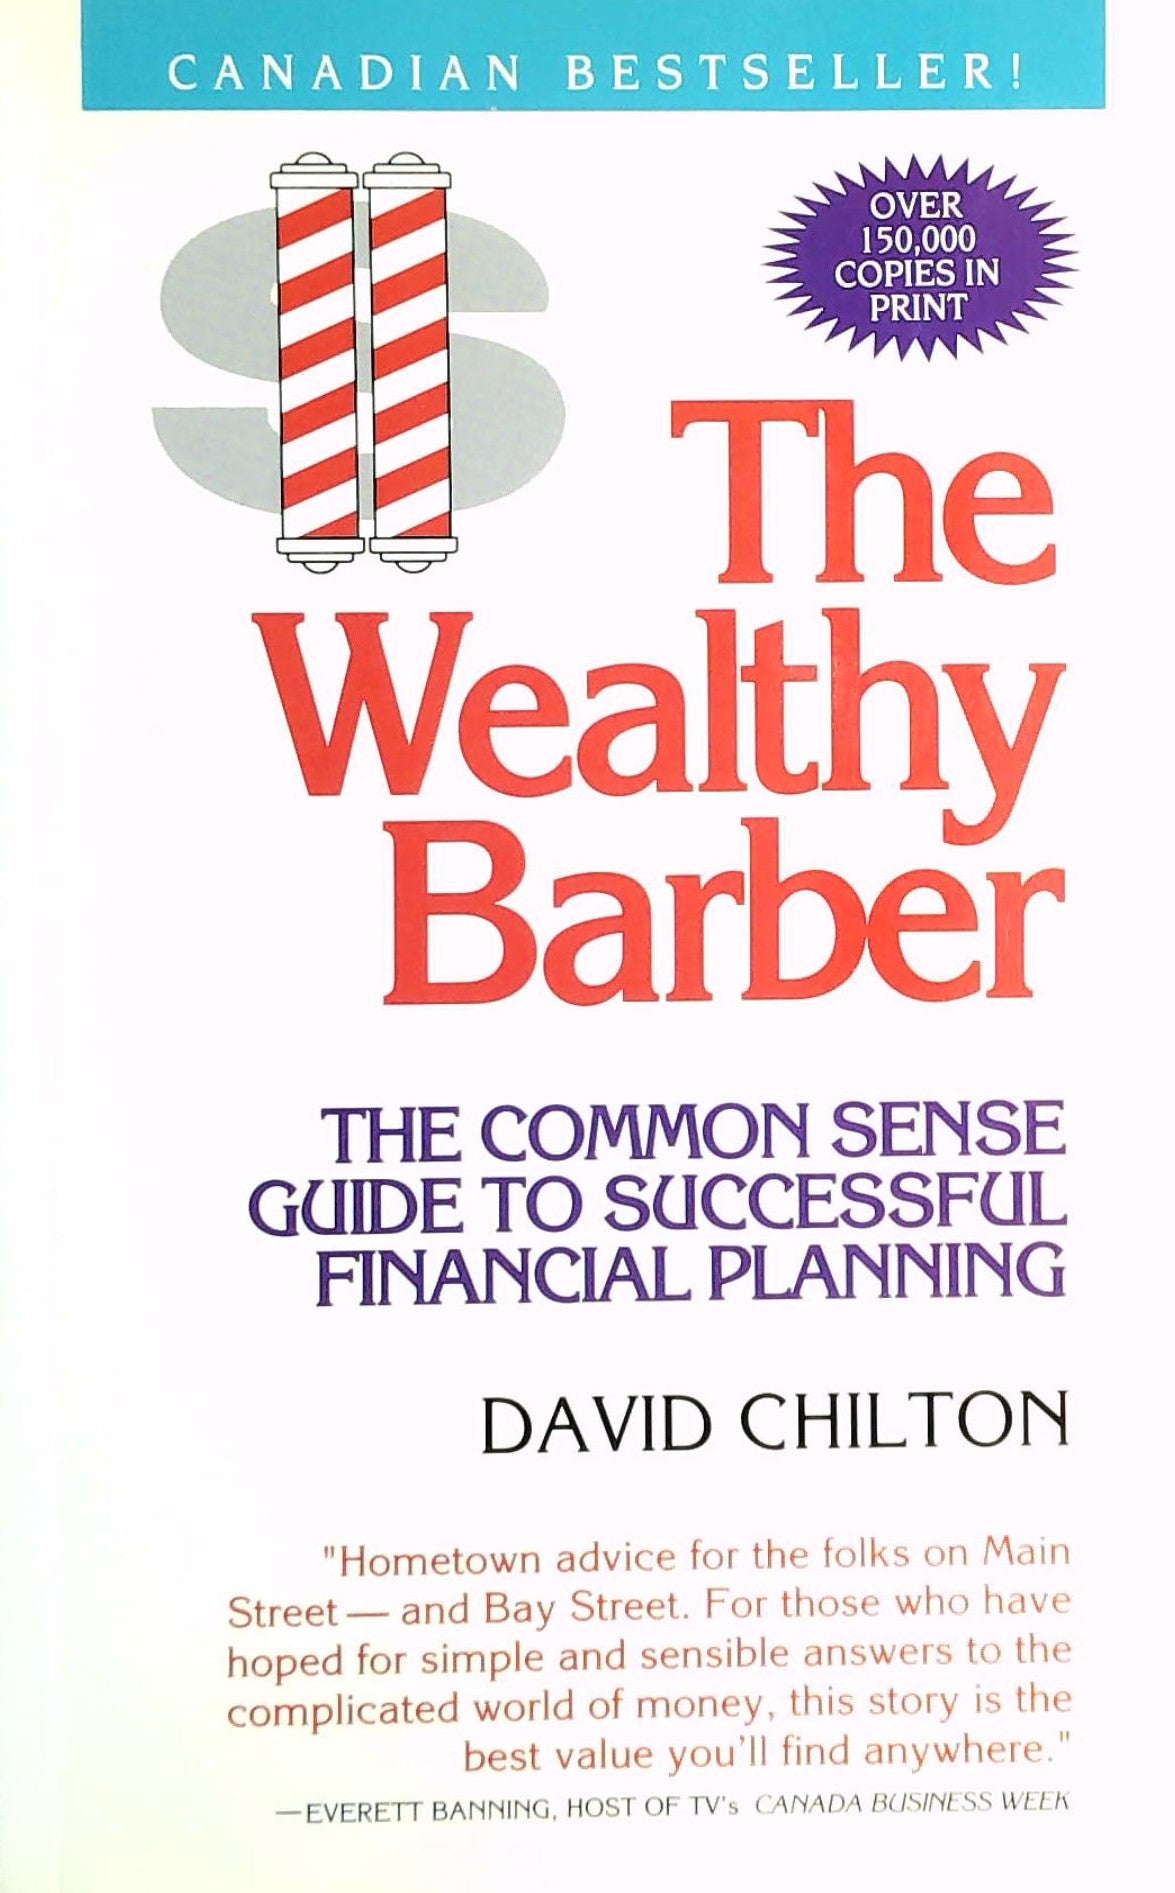 Livre ISBN 0773753184 The Wealthy Barber : The Common Sense Guide Tp Successful Financial Planning (David Chilton)